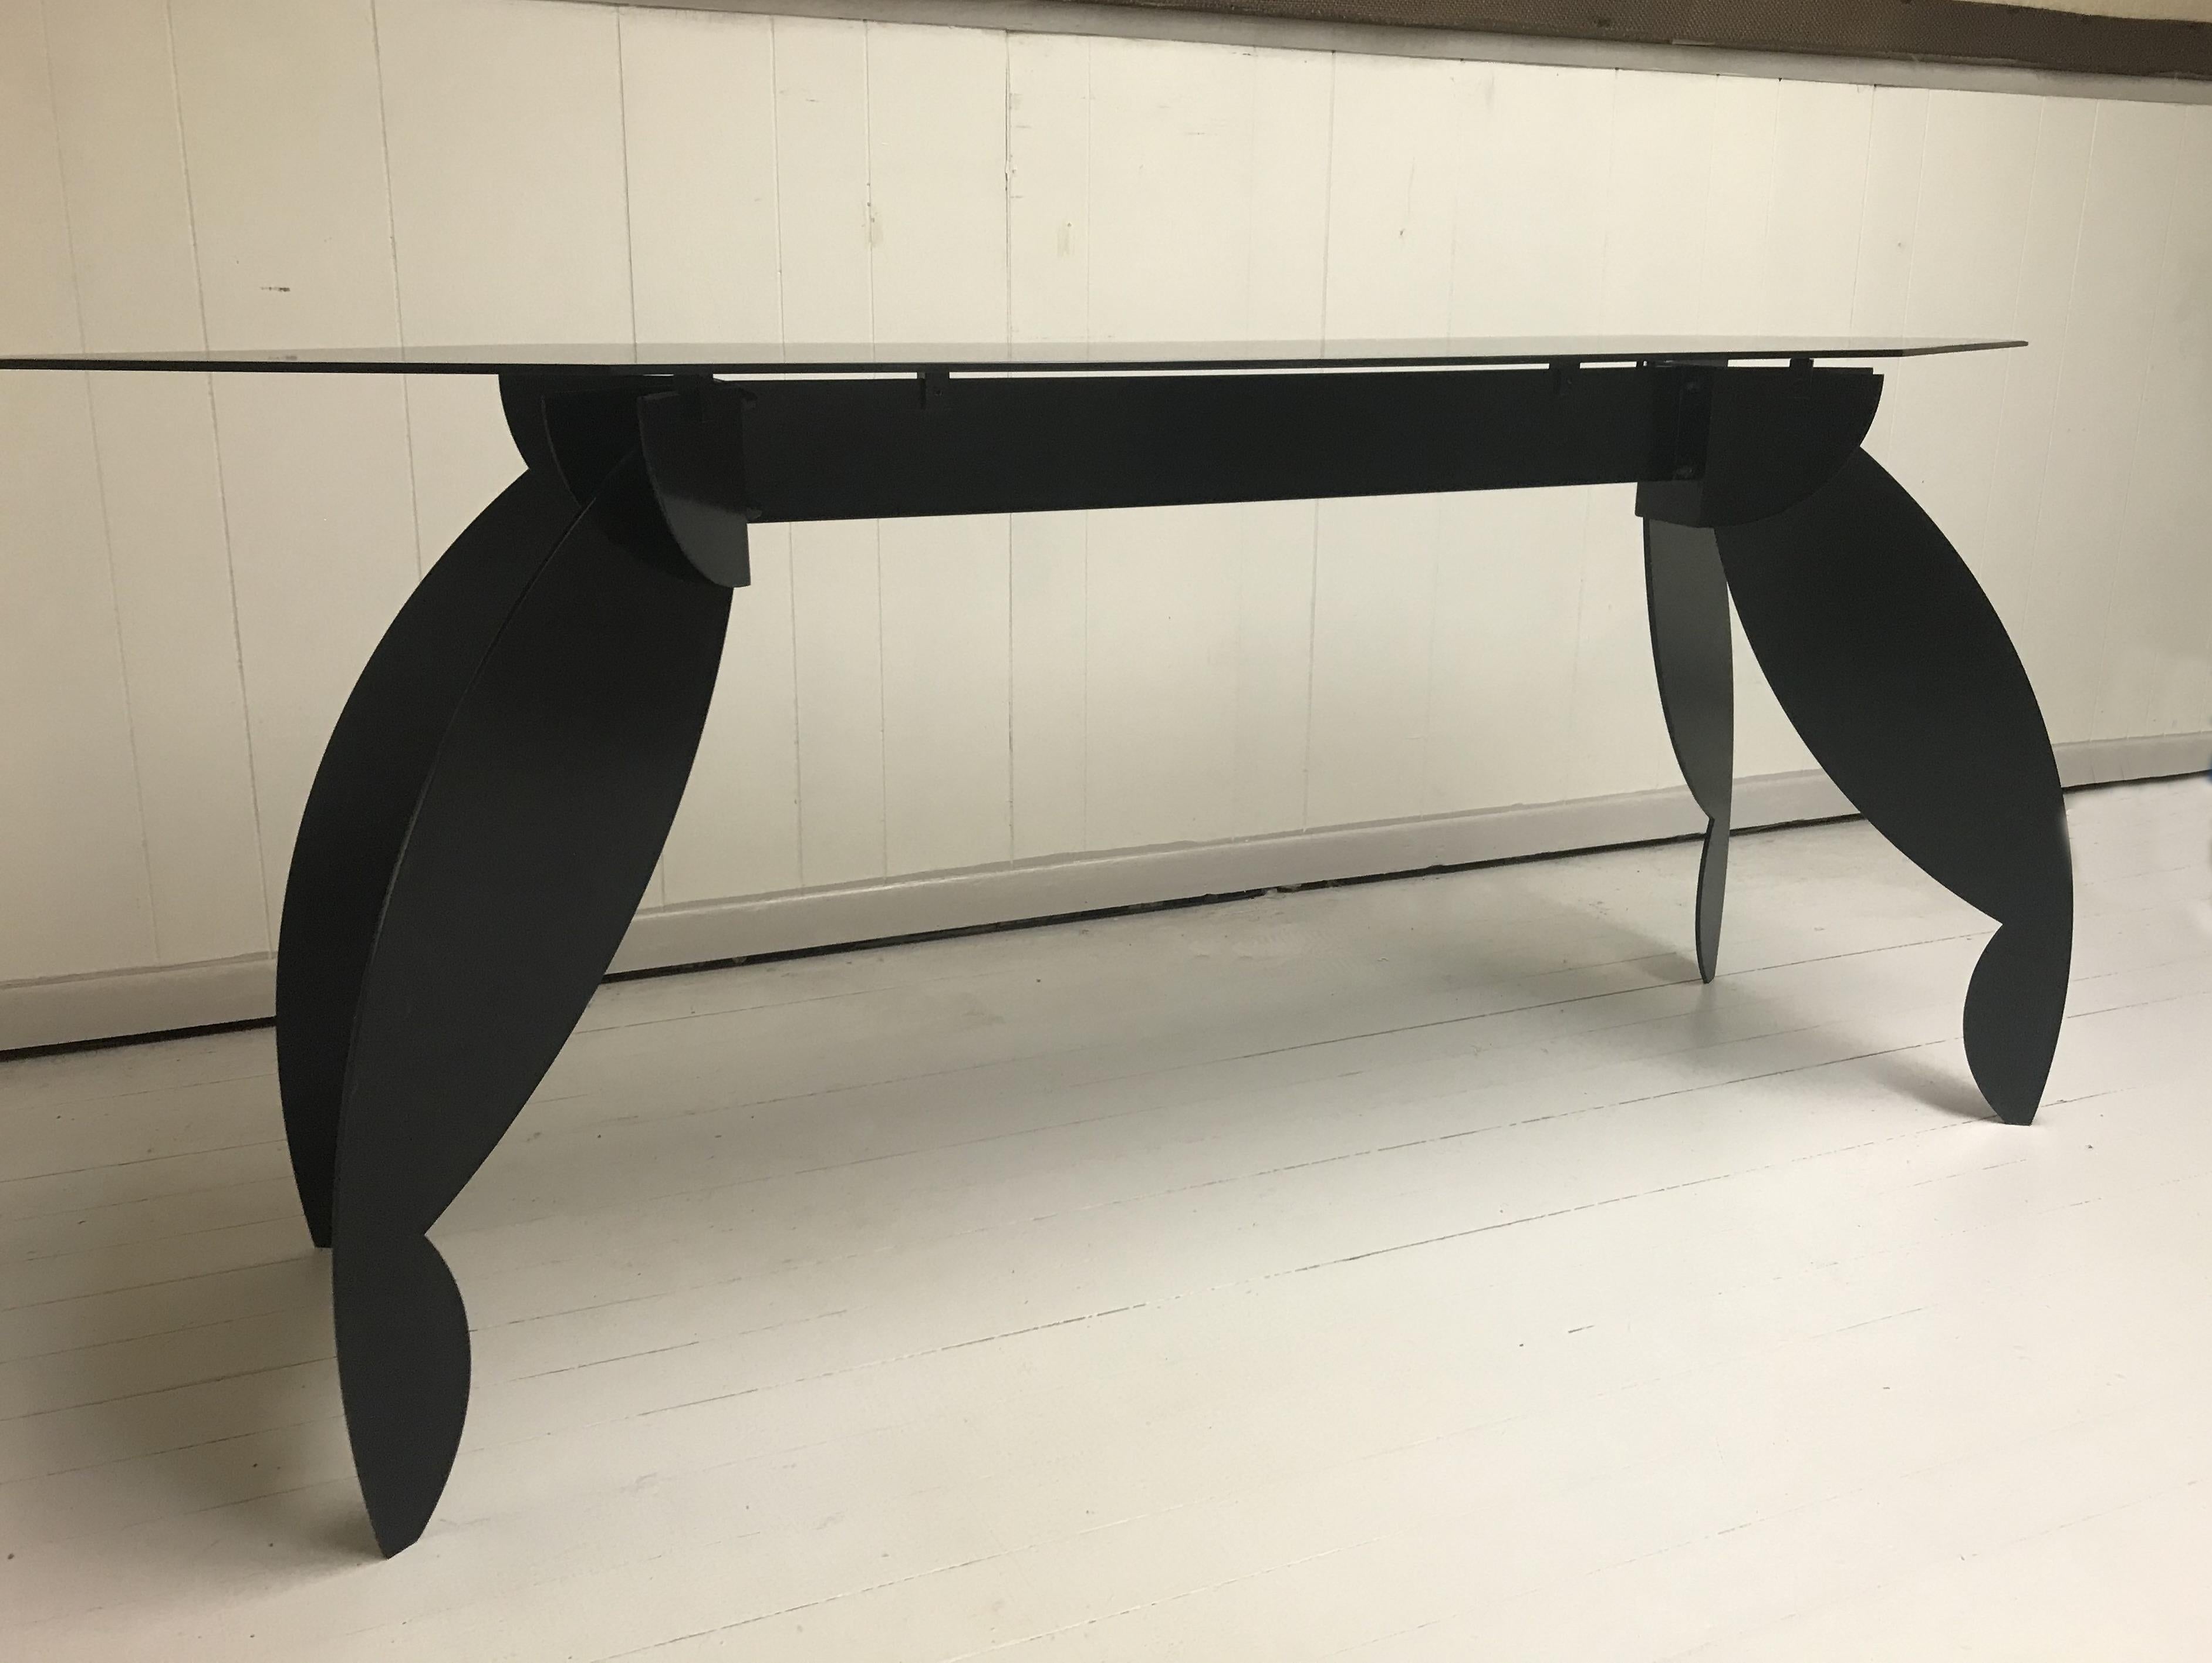 Striking steel console made of black lacquer steel.
This piece is a statement!
It is one of a kind creation by an unknown artist.